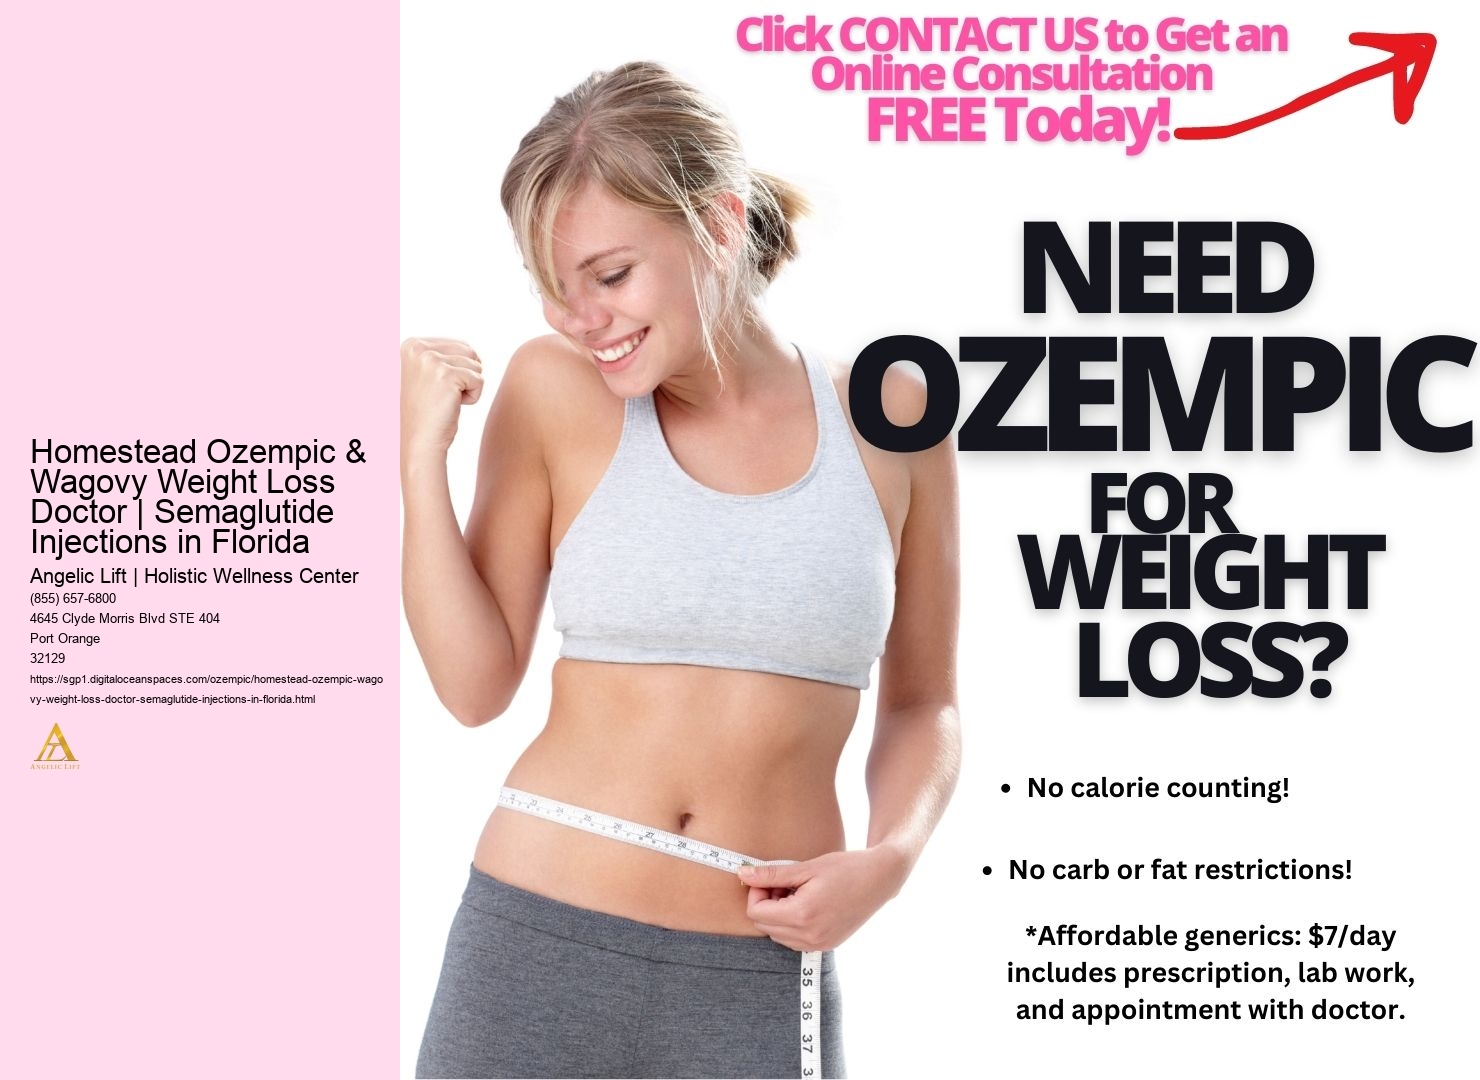 Homestead Ozempic & Wagovy Weight Loss Doctor | Semaglutide Injections in Florida